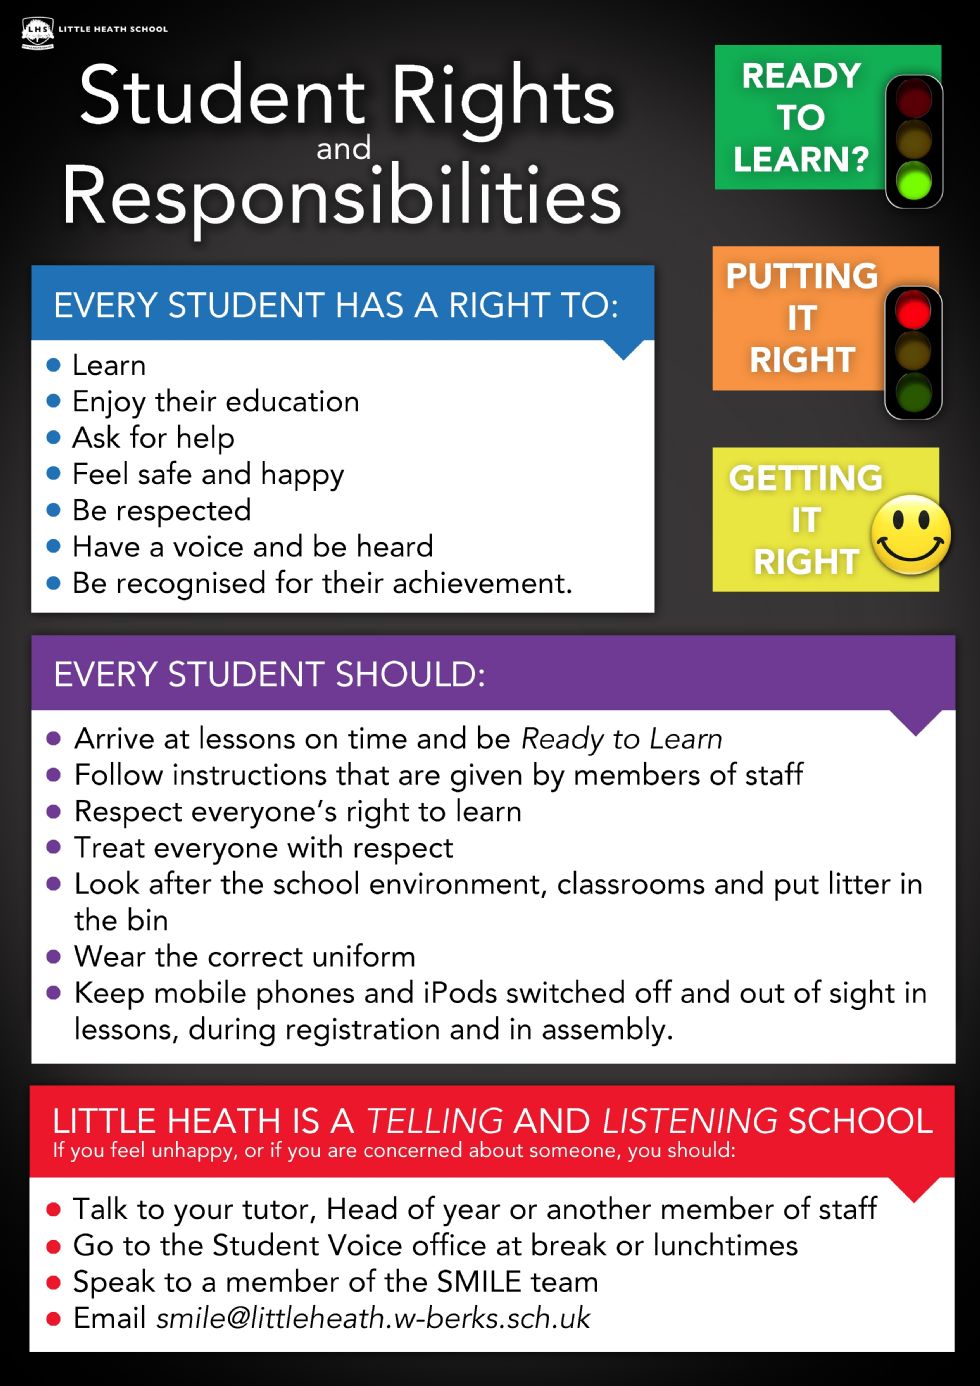 Duties and responsibilities of a student